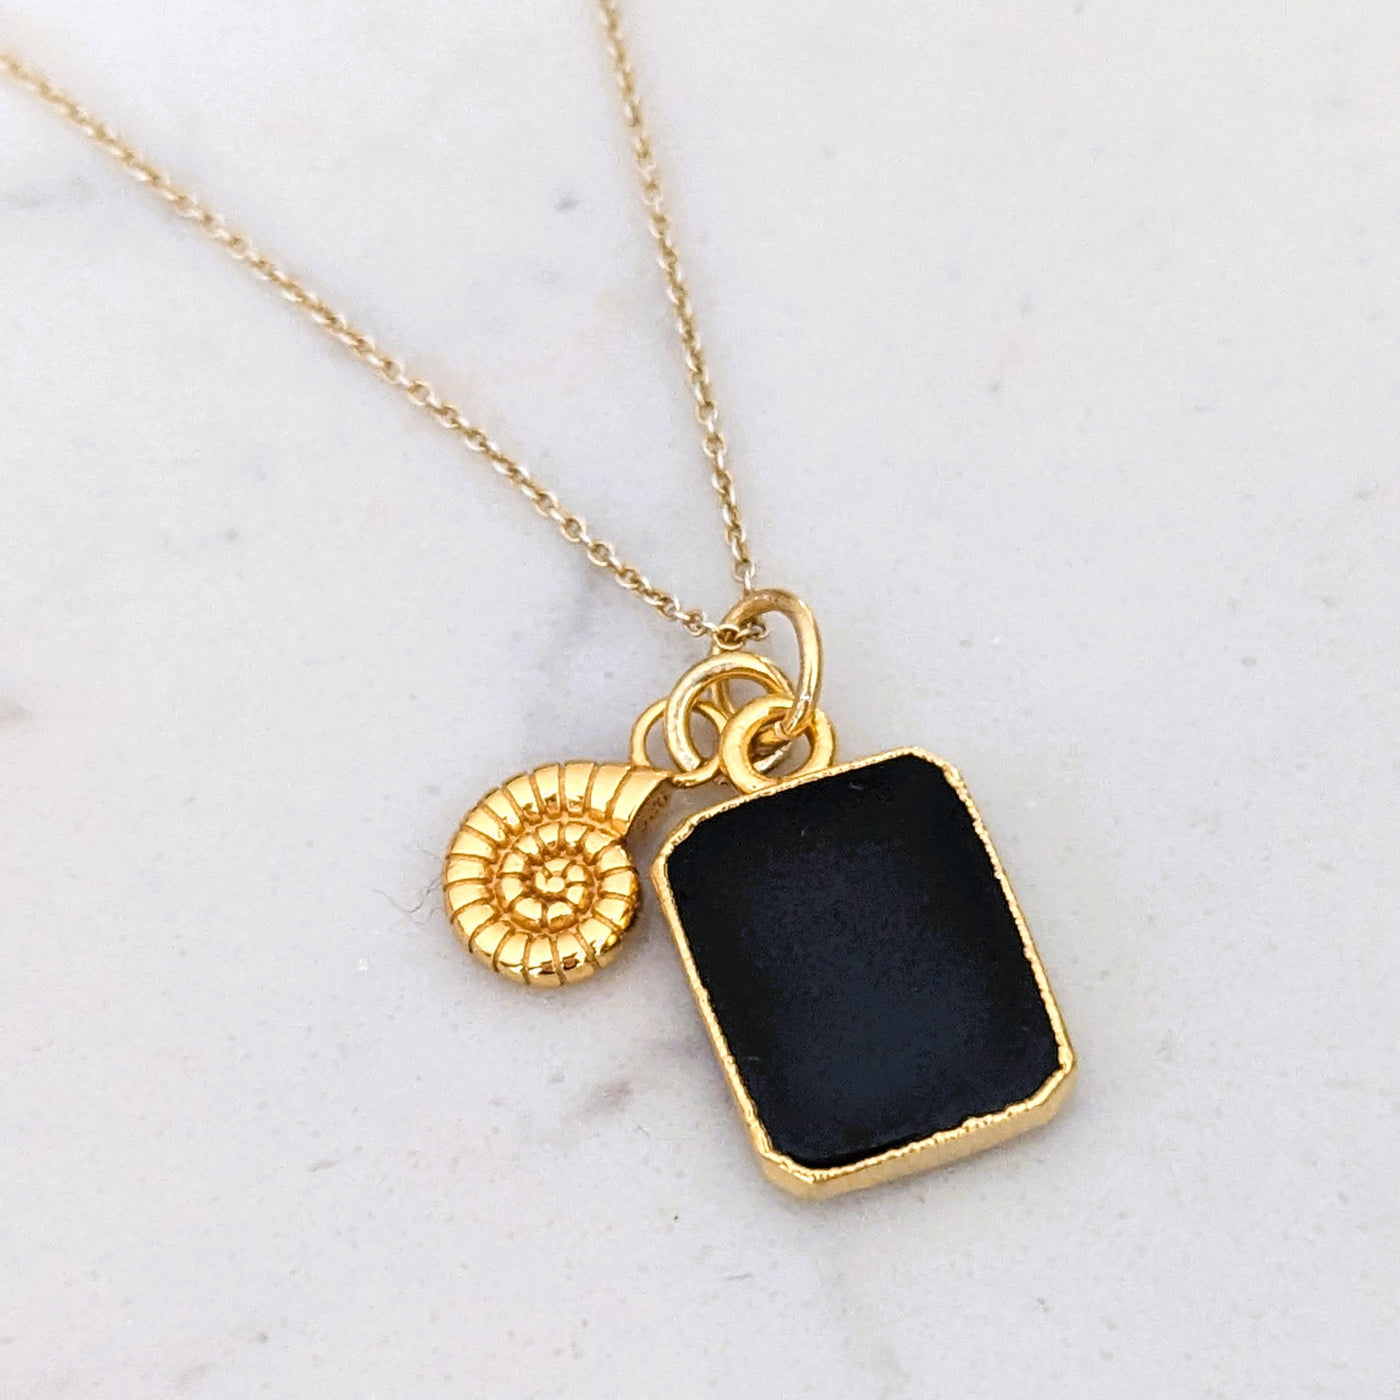 The Duo Black Onyx Necklace - 18ct Gold Plated